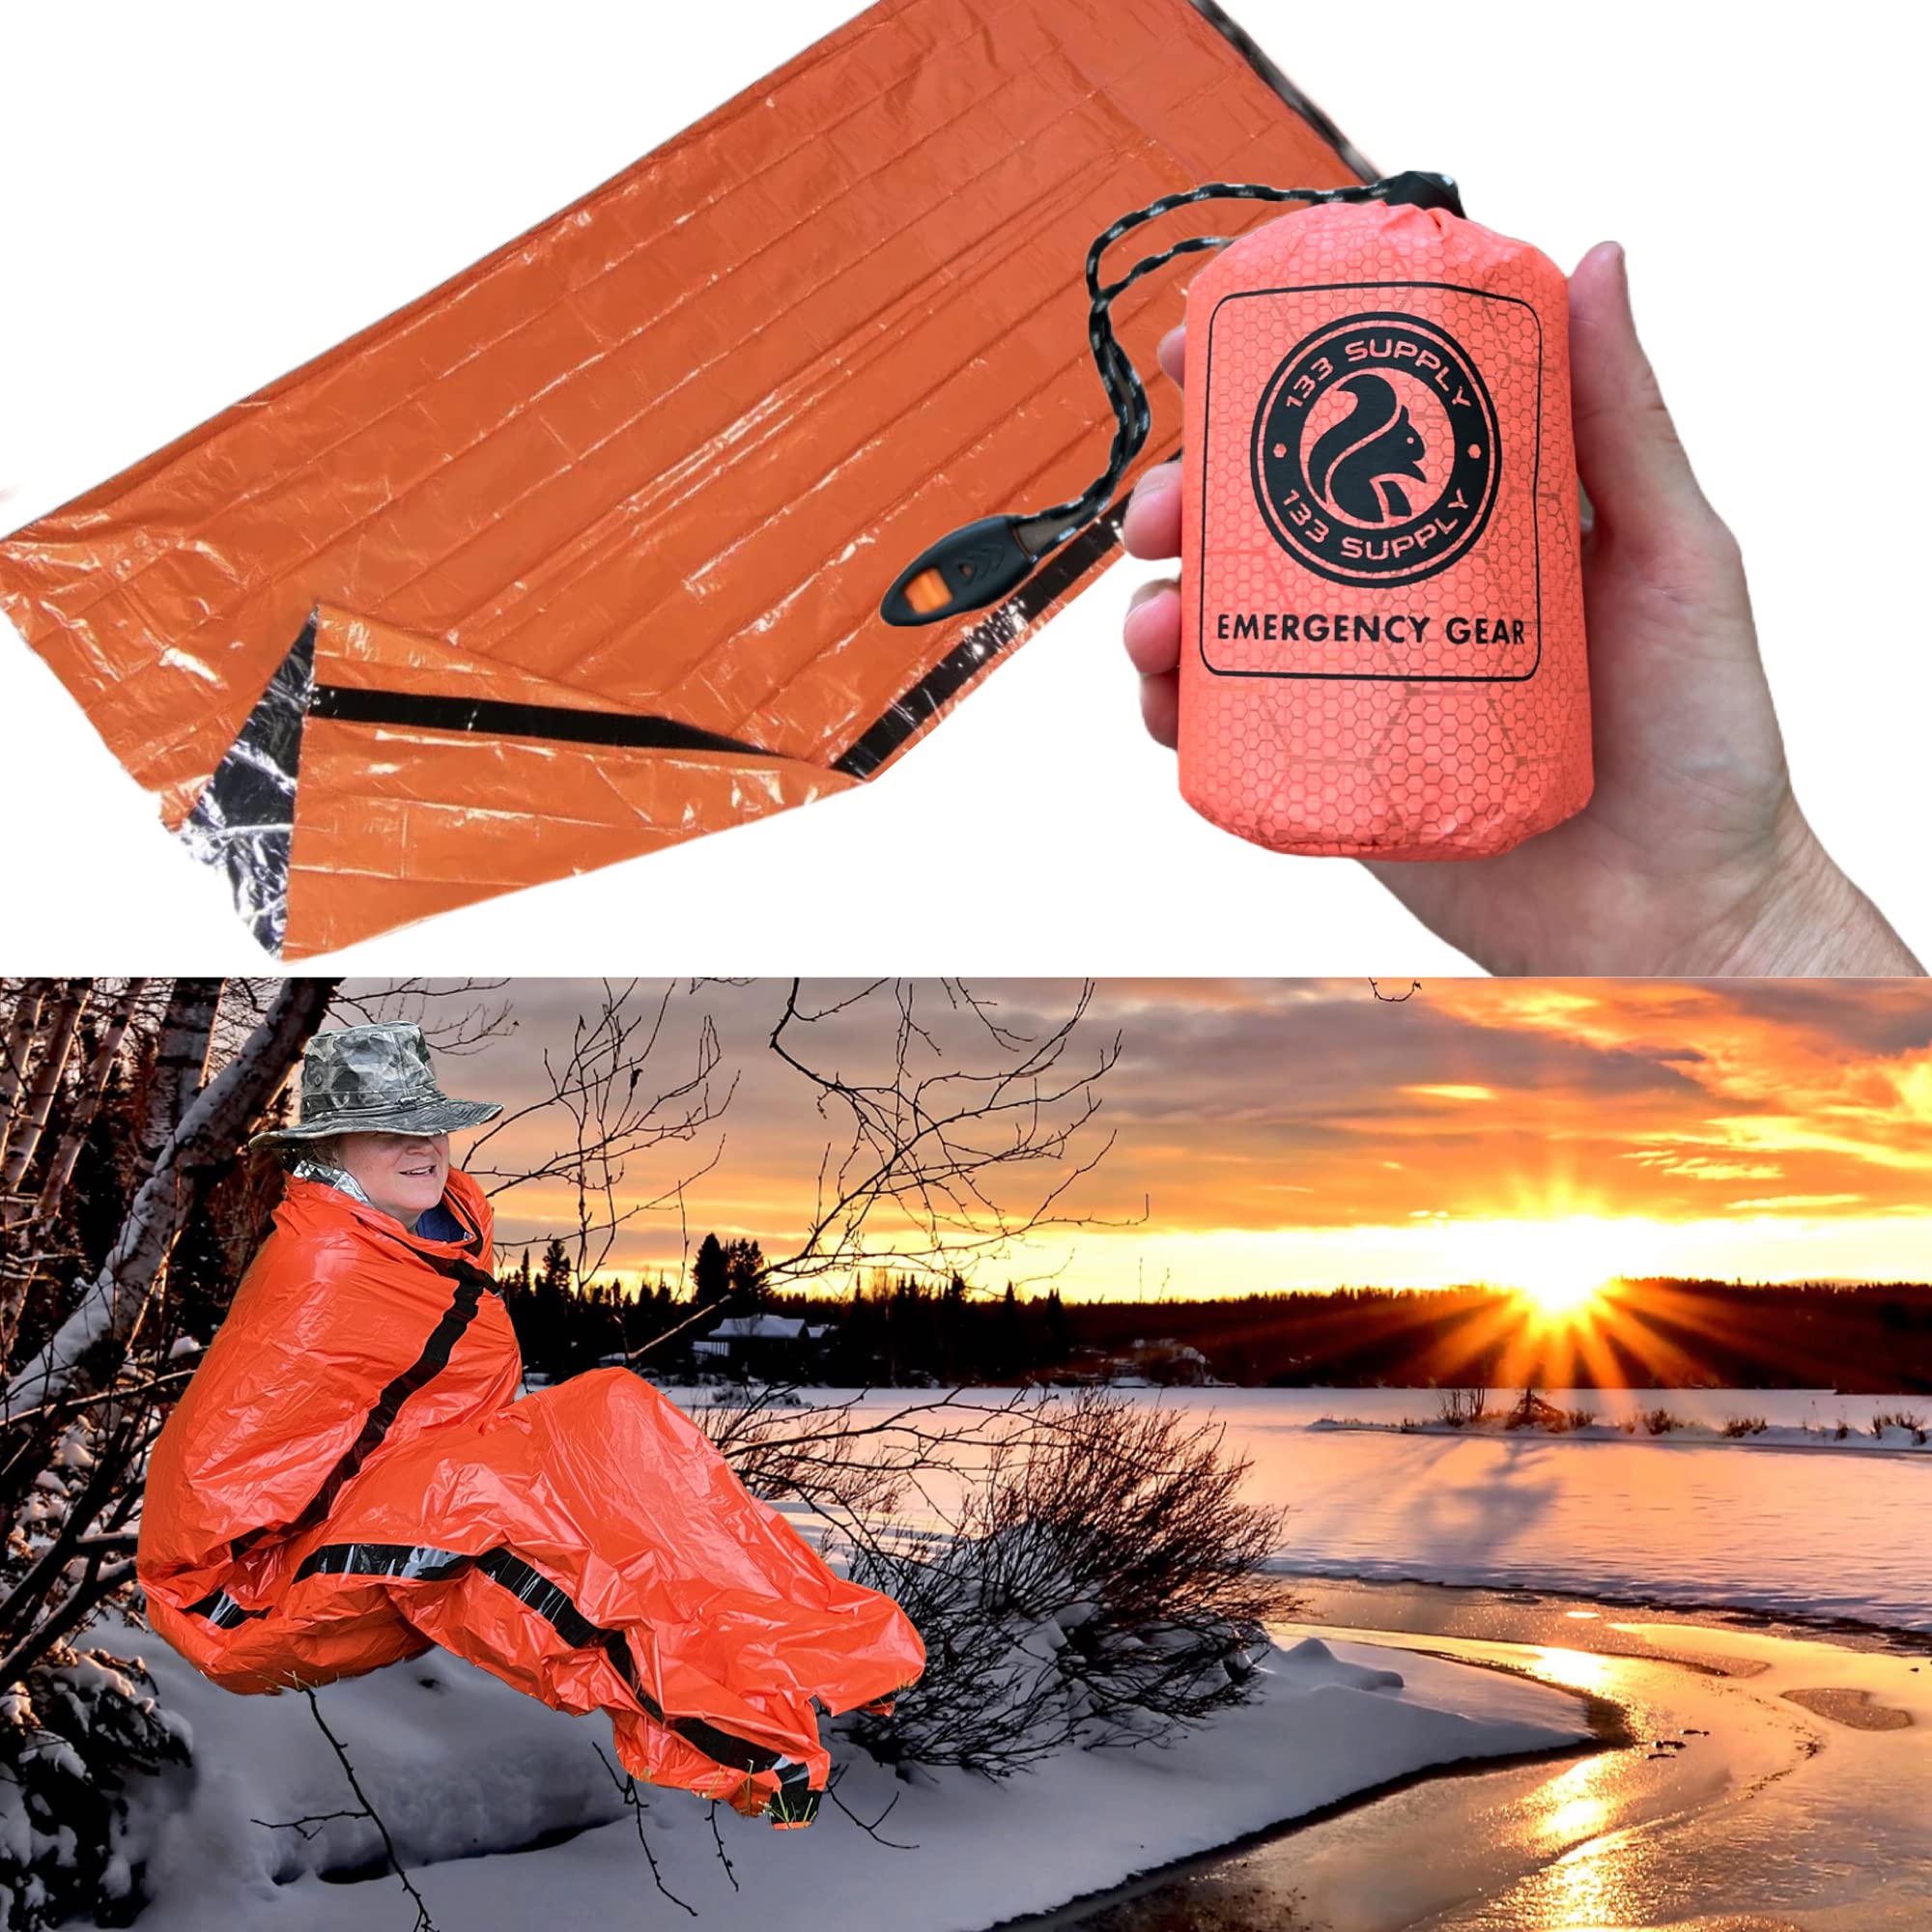 133 SUPPLY Emergency Sleeping Bags for Survival Thermal Blankets